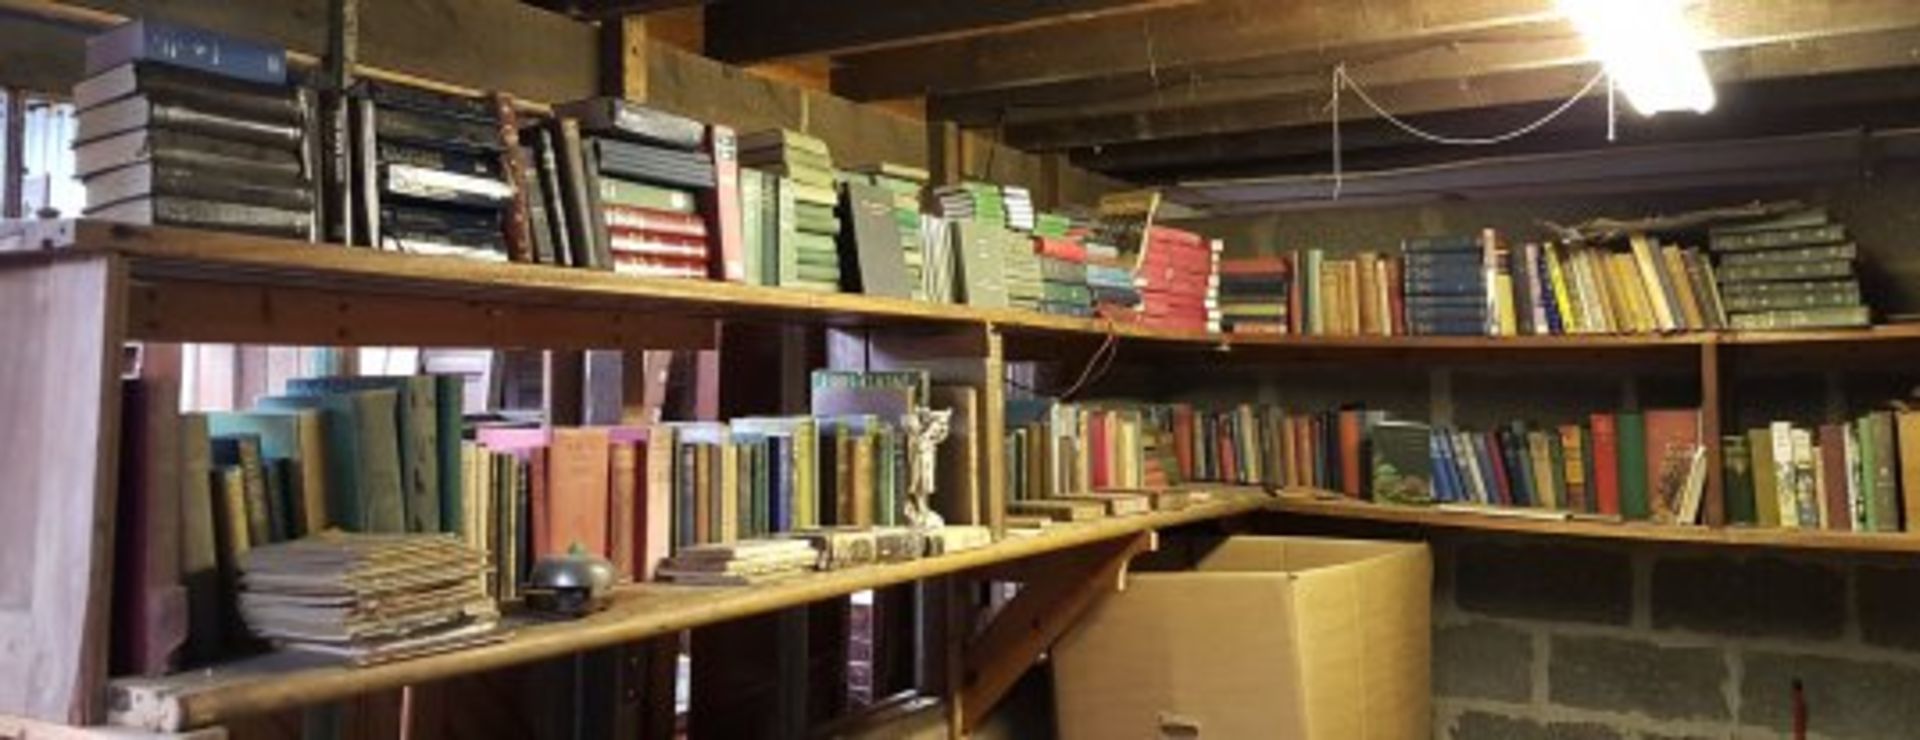 Library - Two Long Shelves of Books - Image 2 of 2